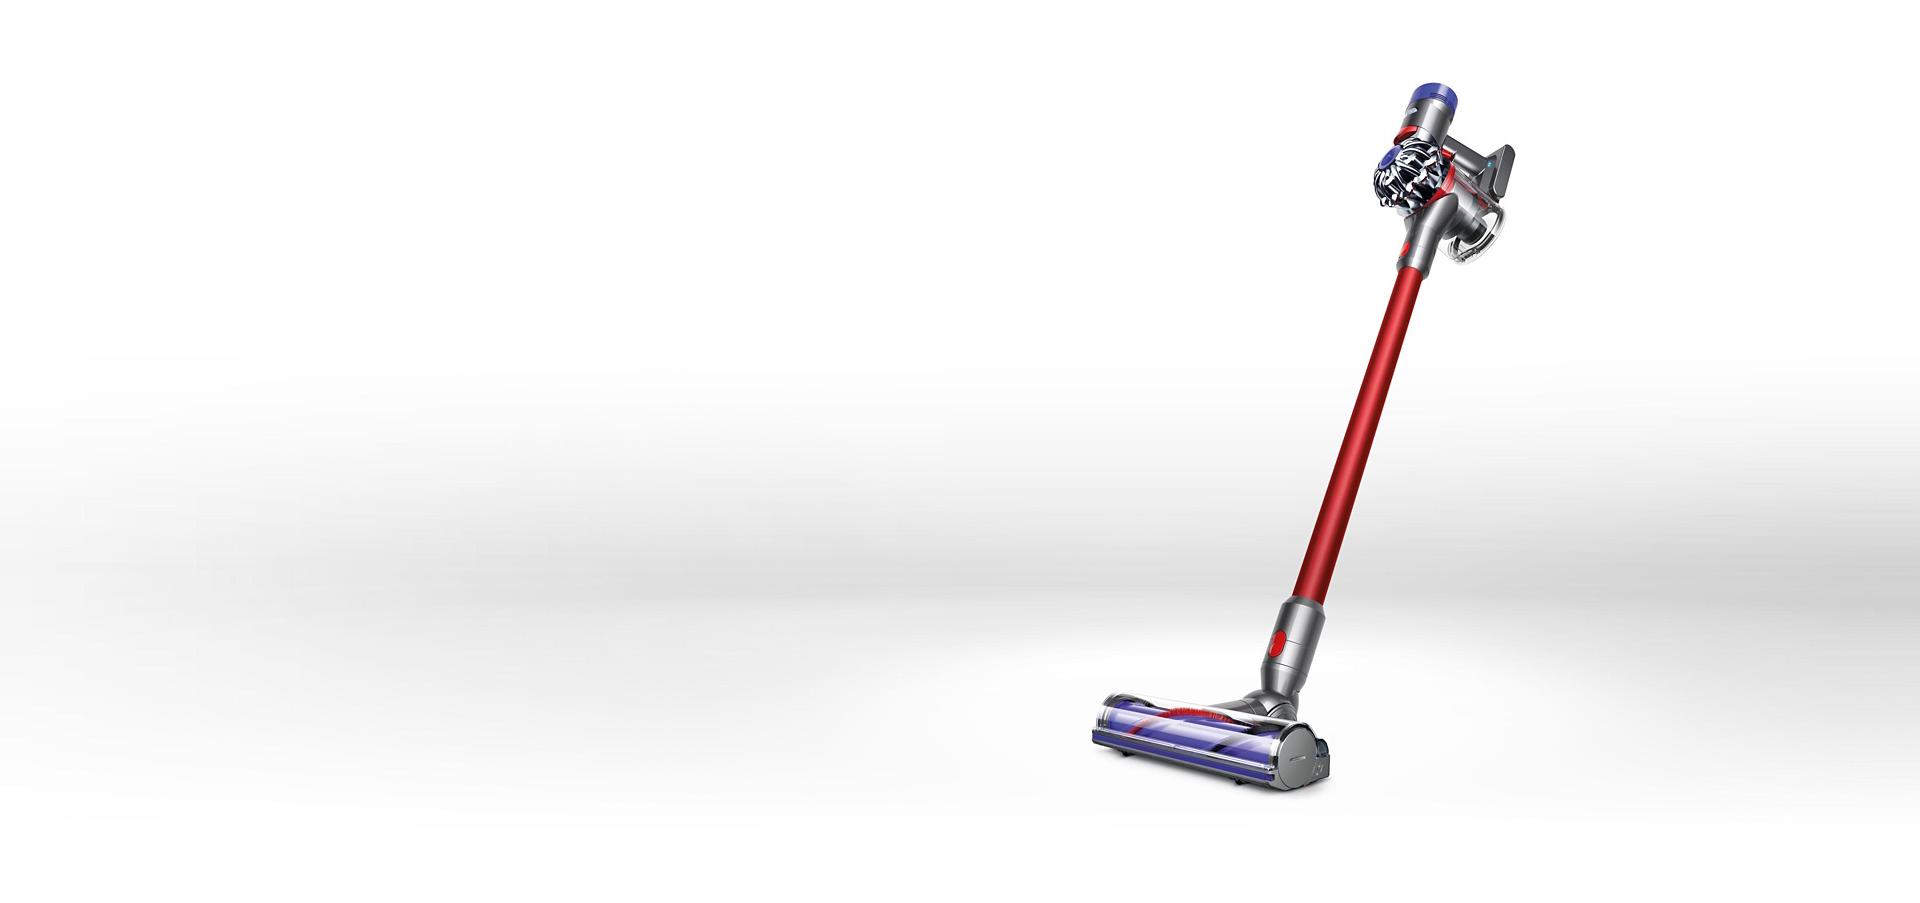 Two Dyson V7 vacuum cleaners